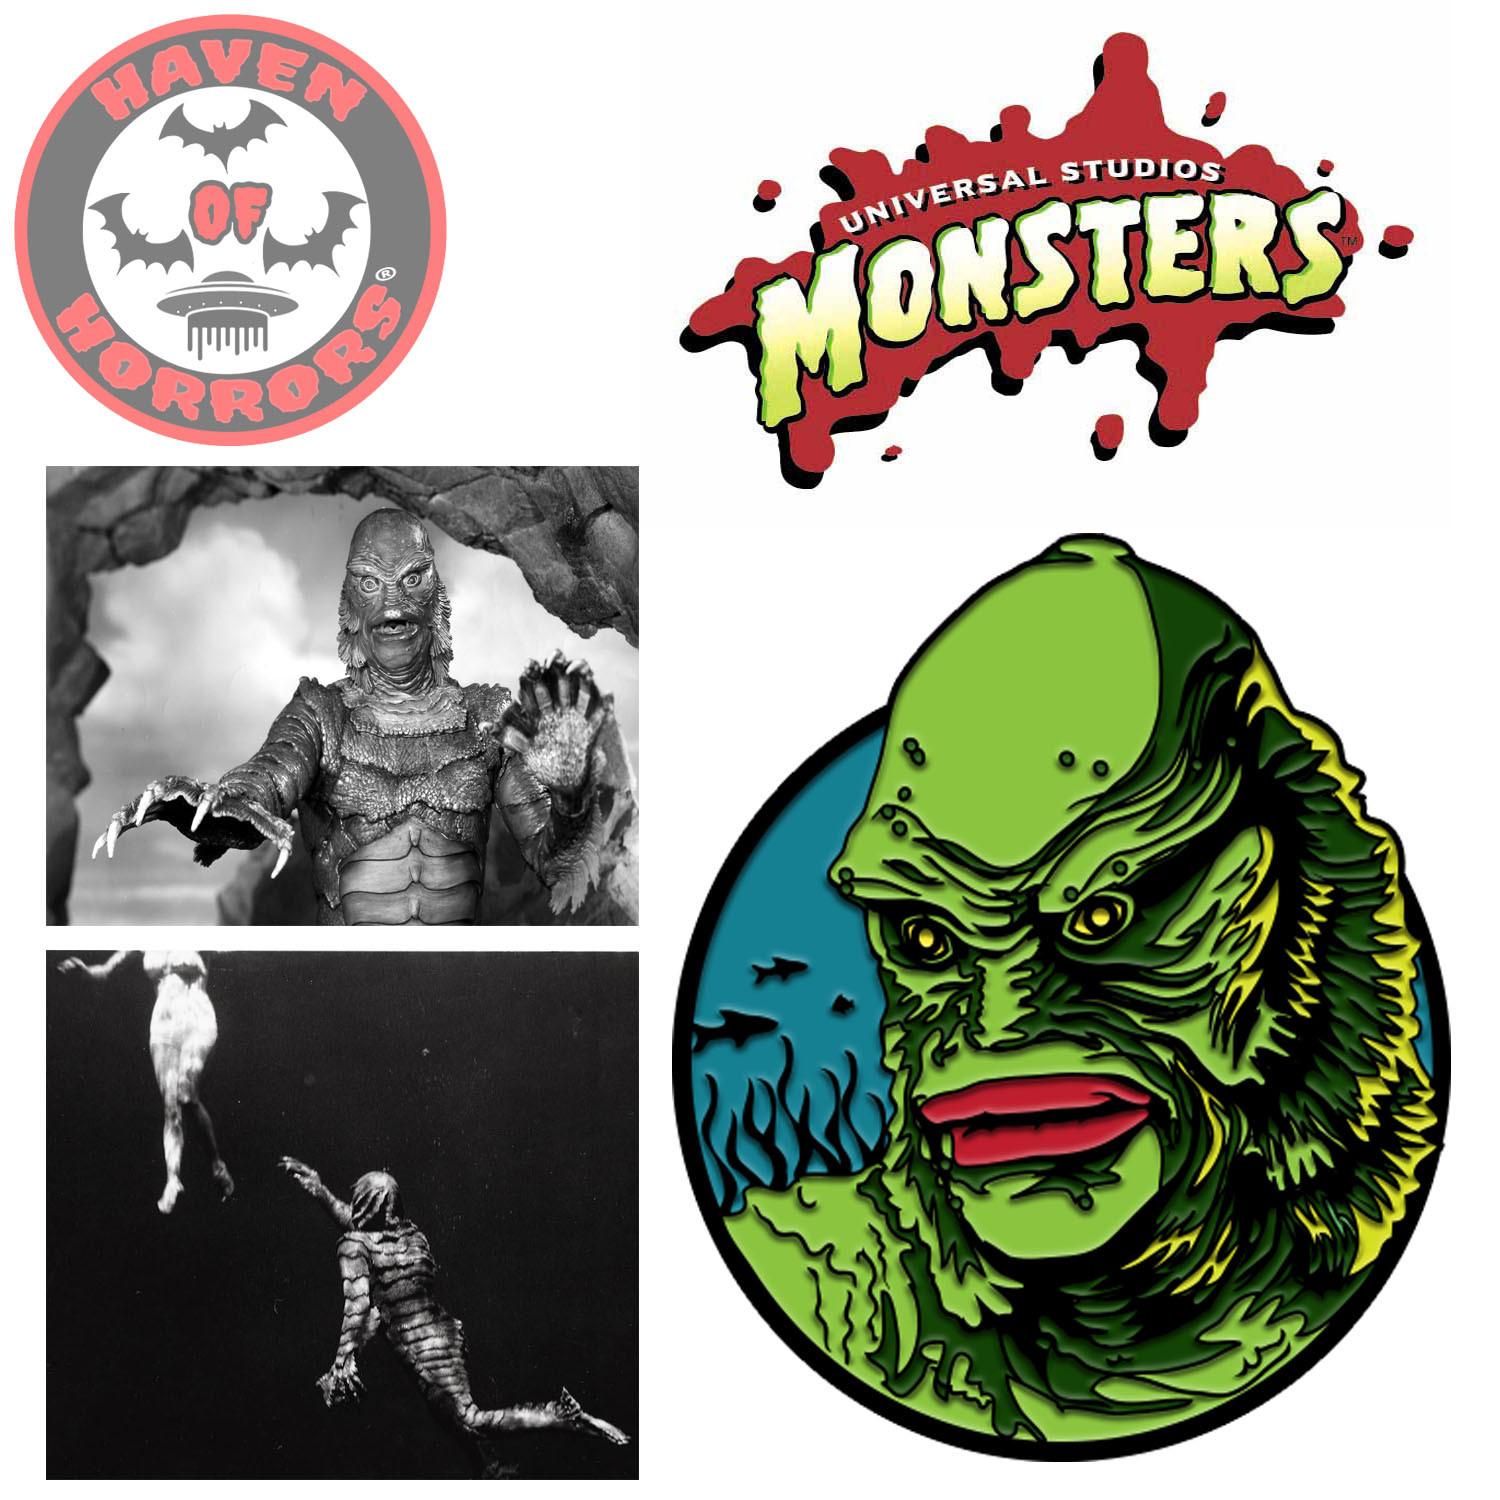 https://cdn11.bigcommerce.com/s-sw7g4/images/stencil/1500x1500/products/1471/3042/creature_from_the_black_lagoon_enamel_pin__88651.1637150260.jpg?c=2